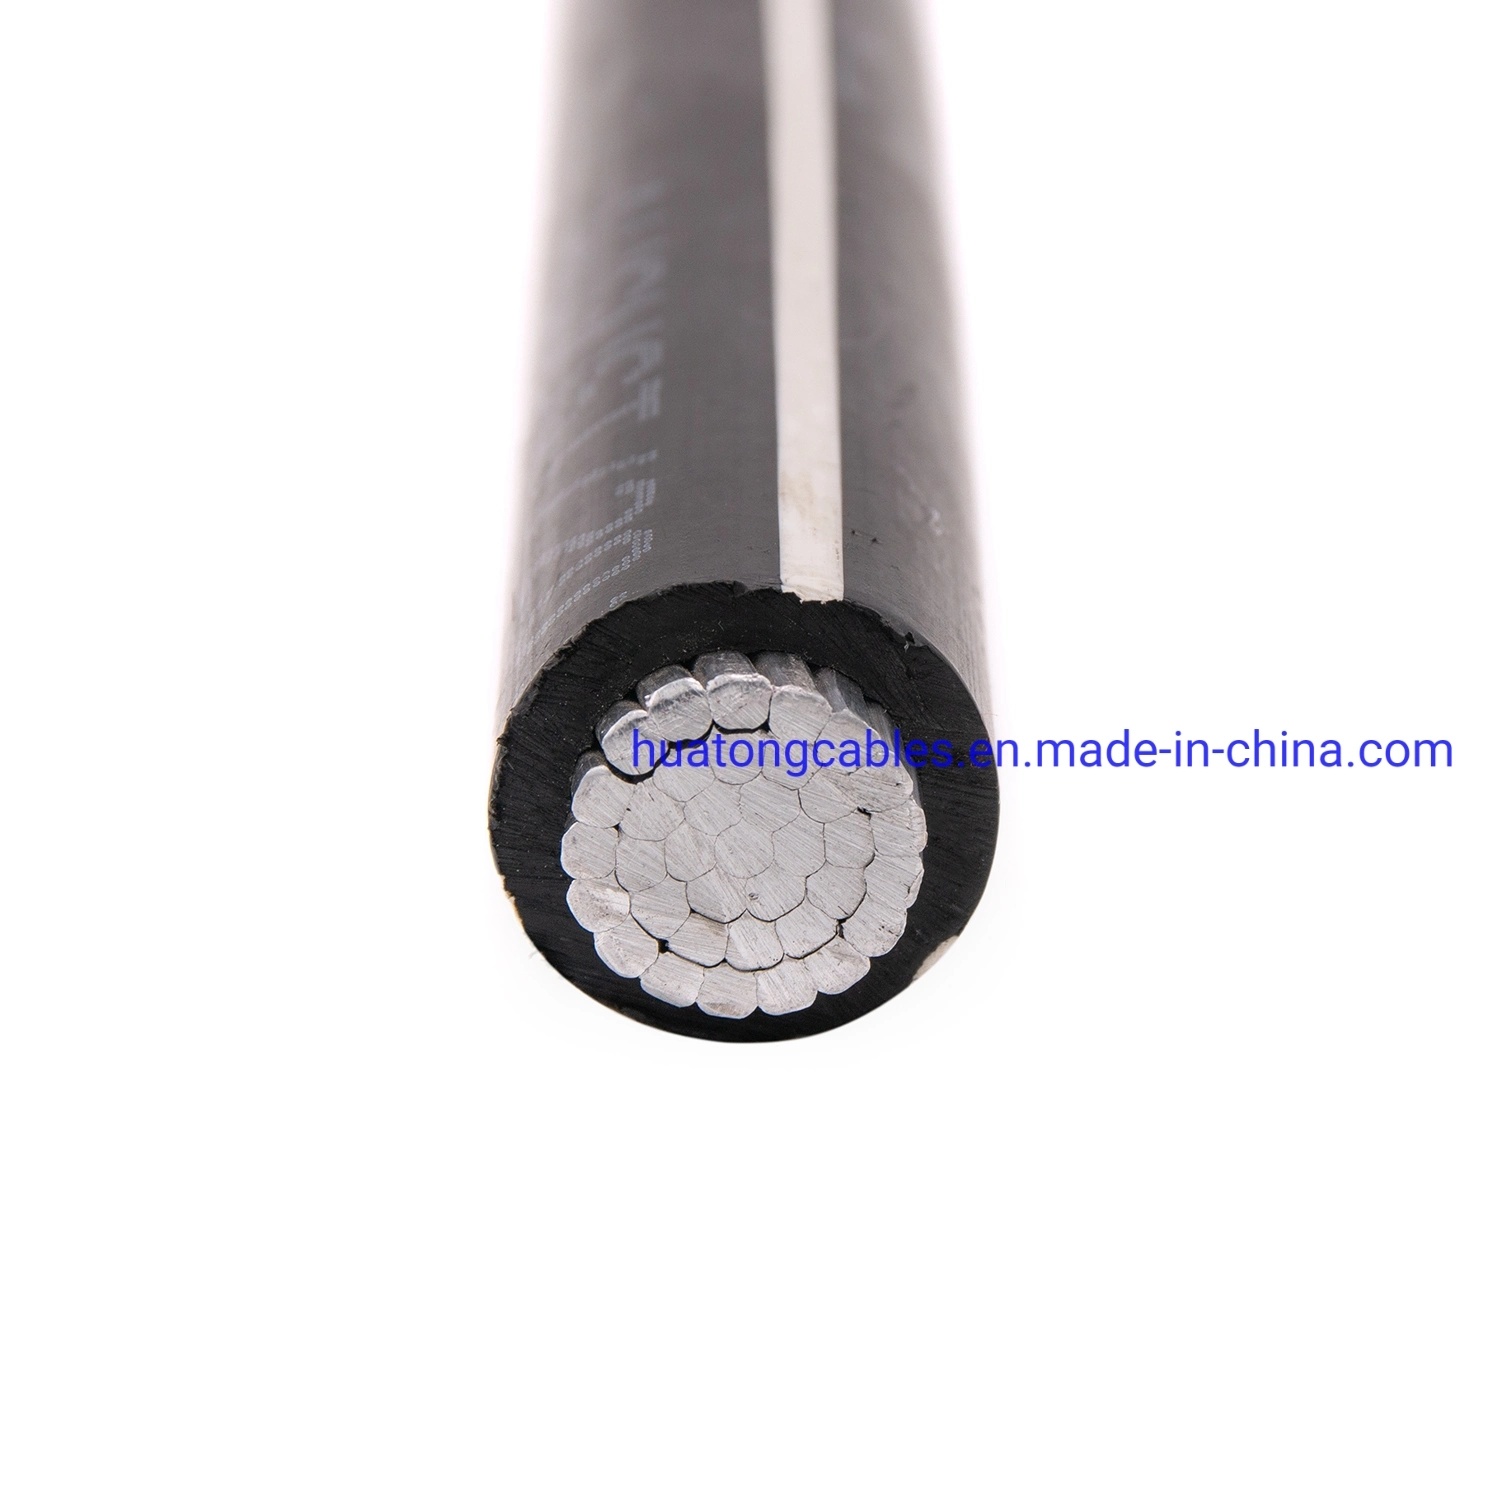 Aluminum Series 8000 Building Wire UL Type Xhhw-2 Wire 600V 4AWG